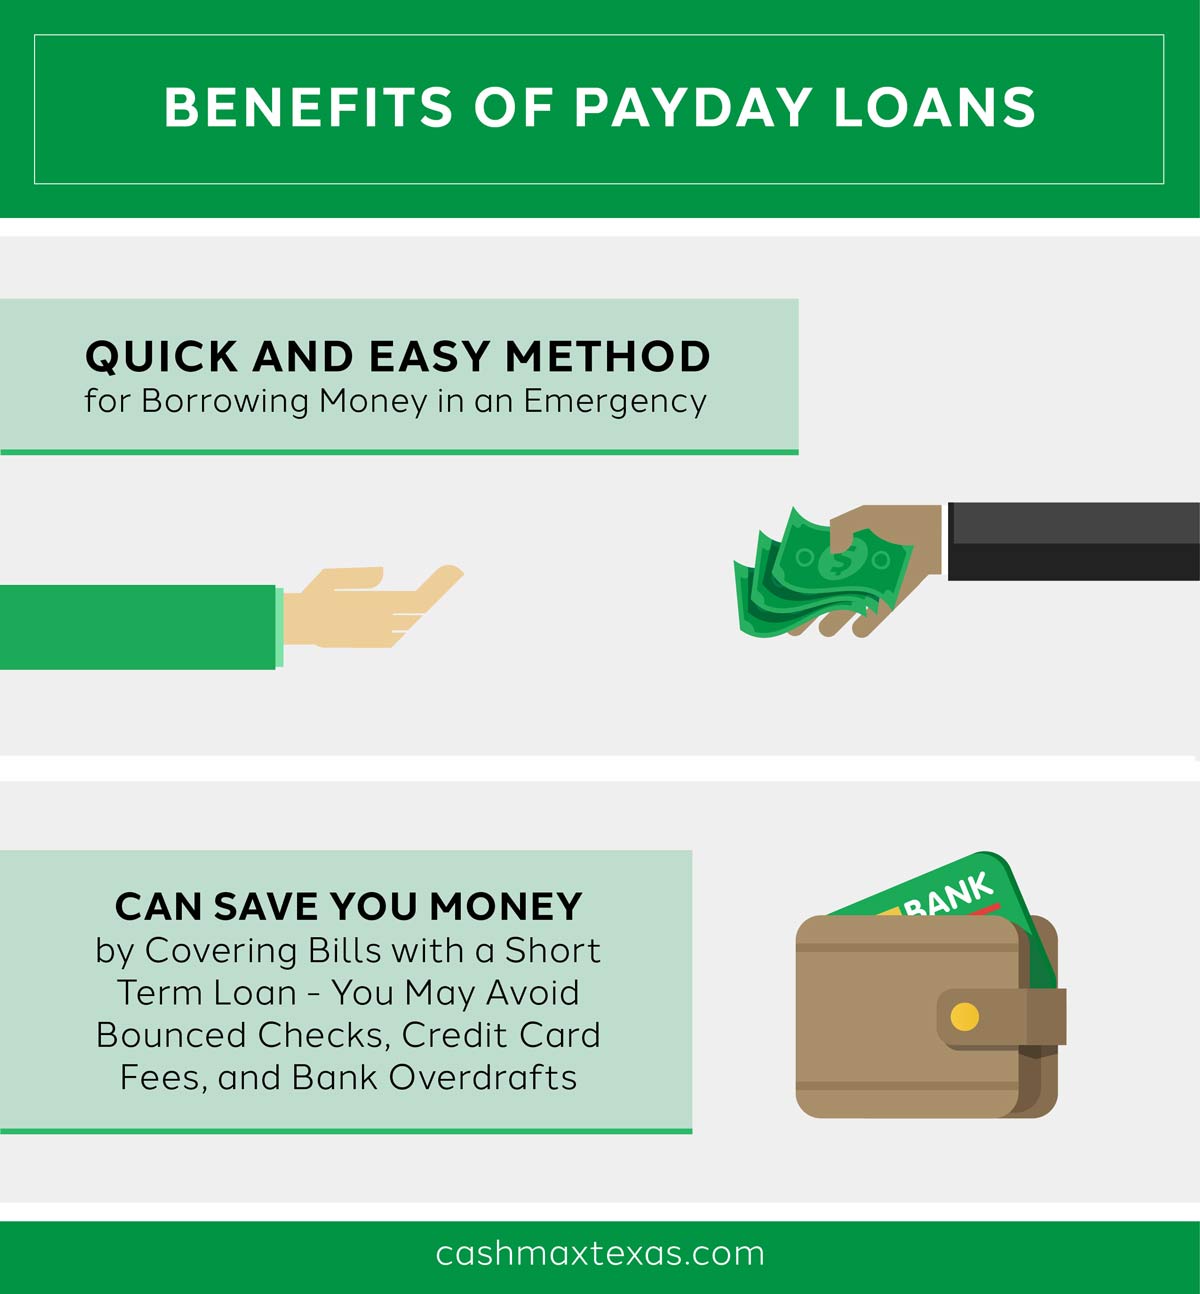 CashMax payday loan information